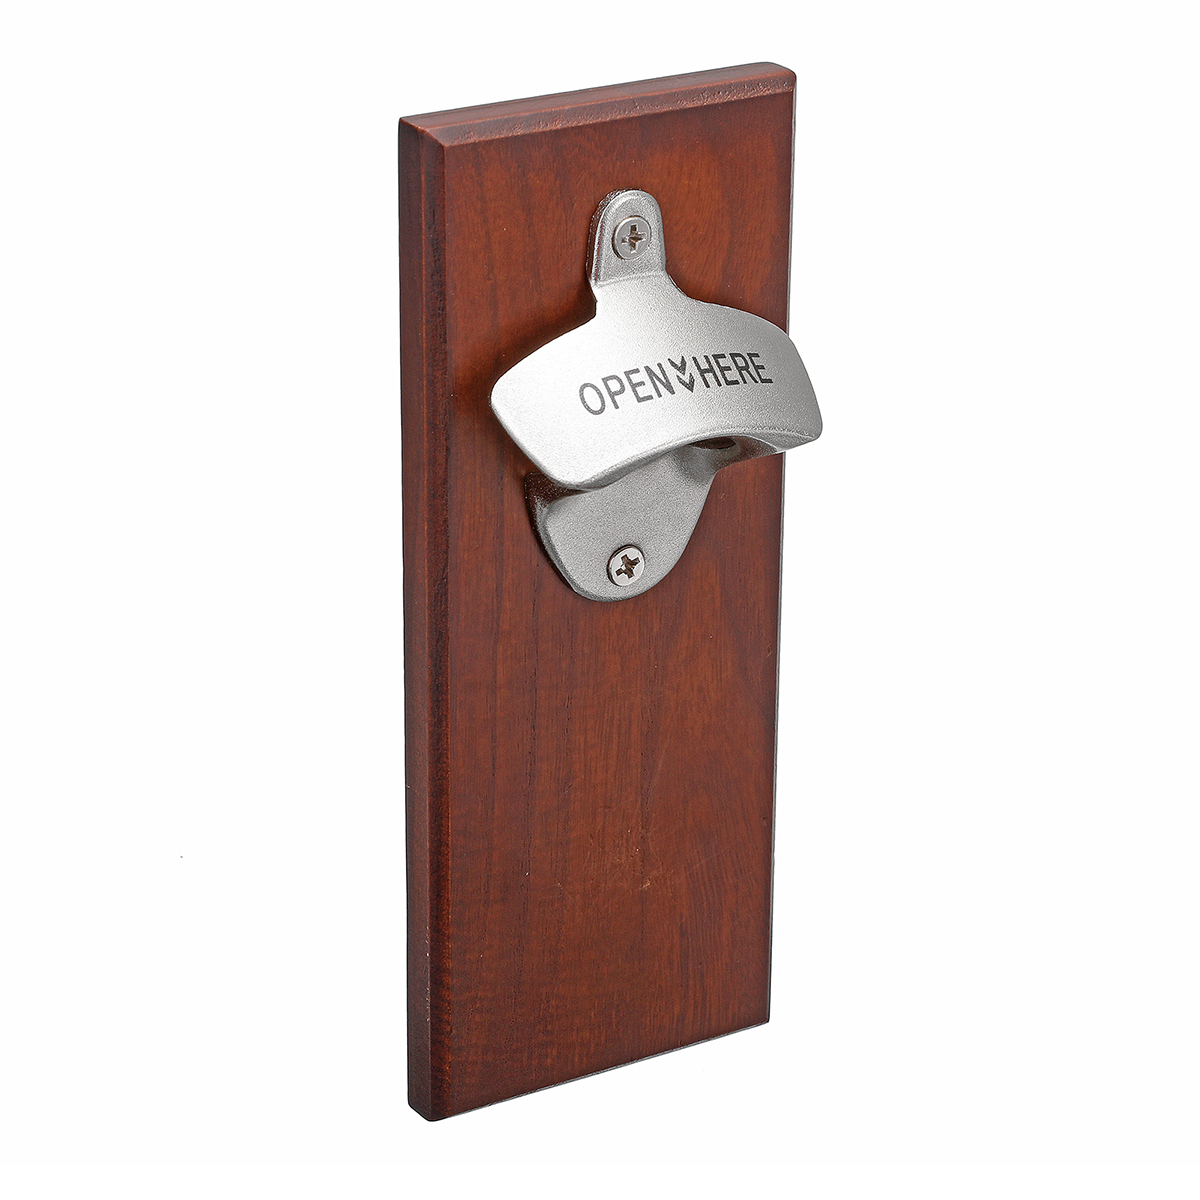 Wooden-Bottle-Opener-Wall-Mounted-Magnetic-Bottle-Openers-with-Cap-Catch-1964775-12